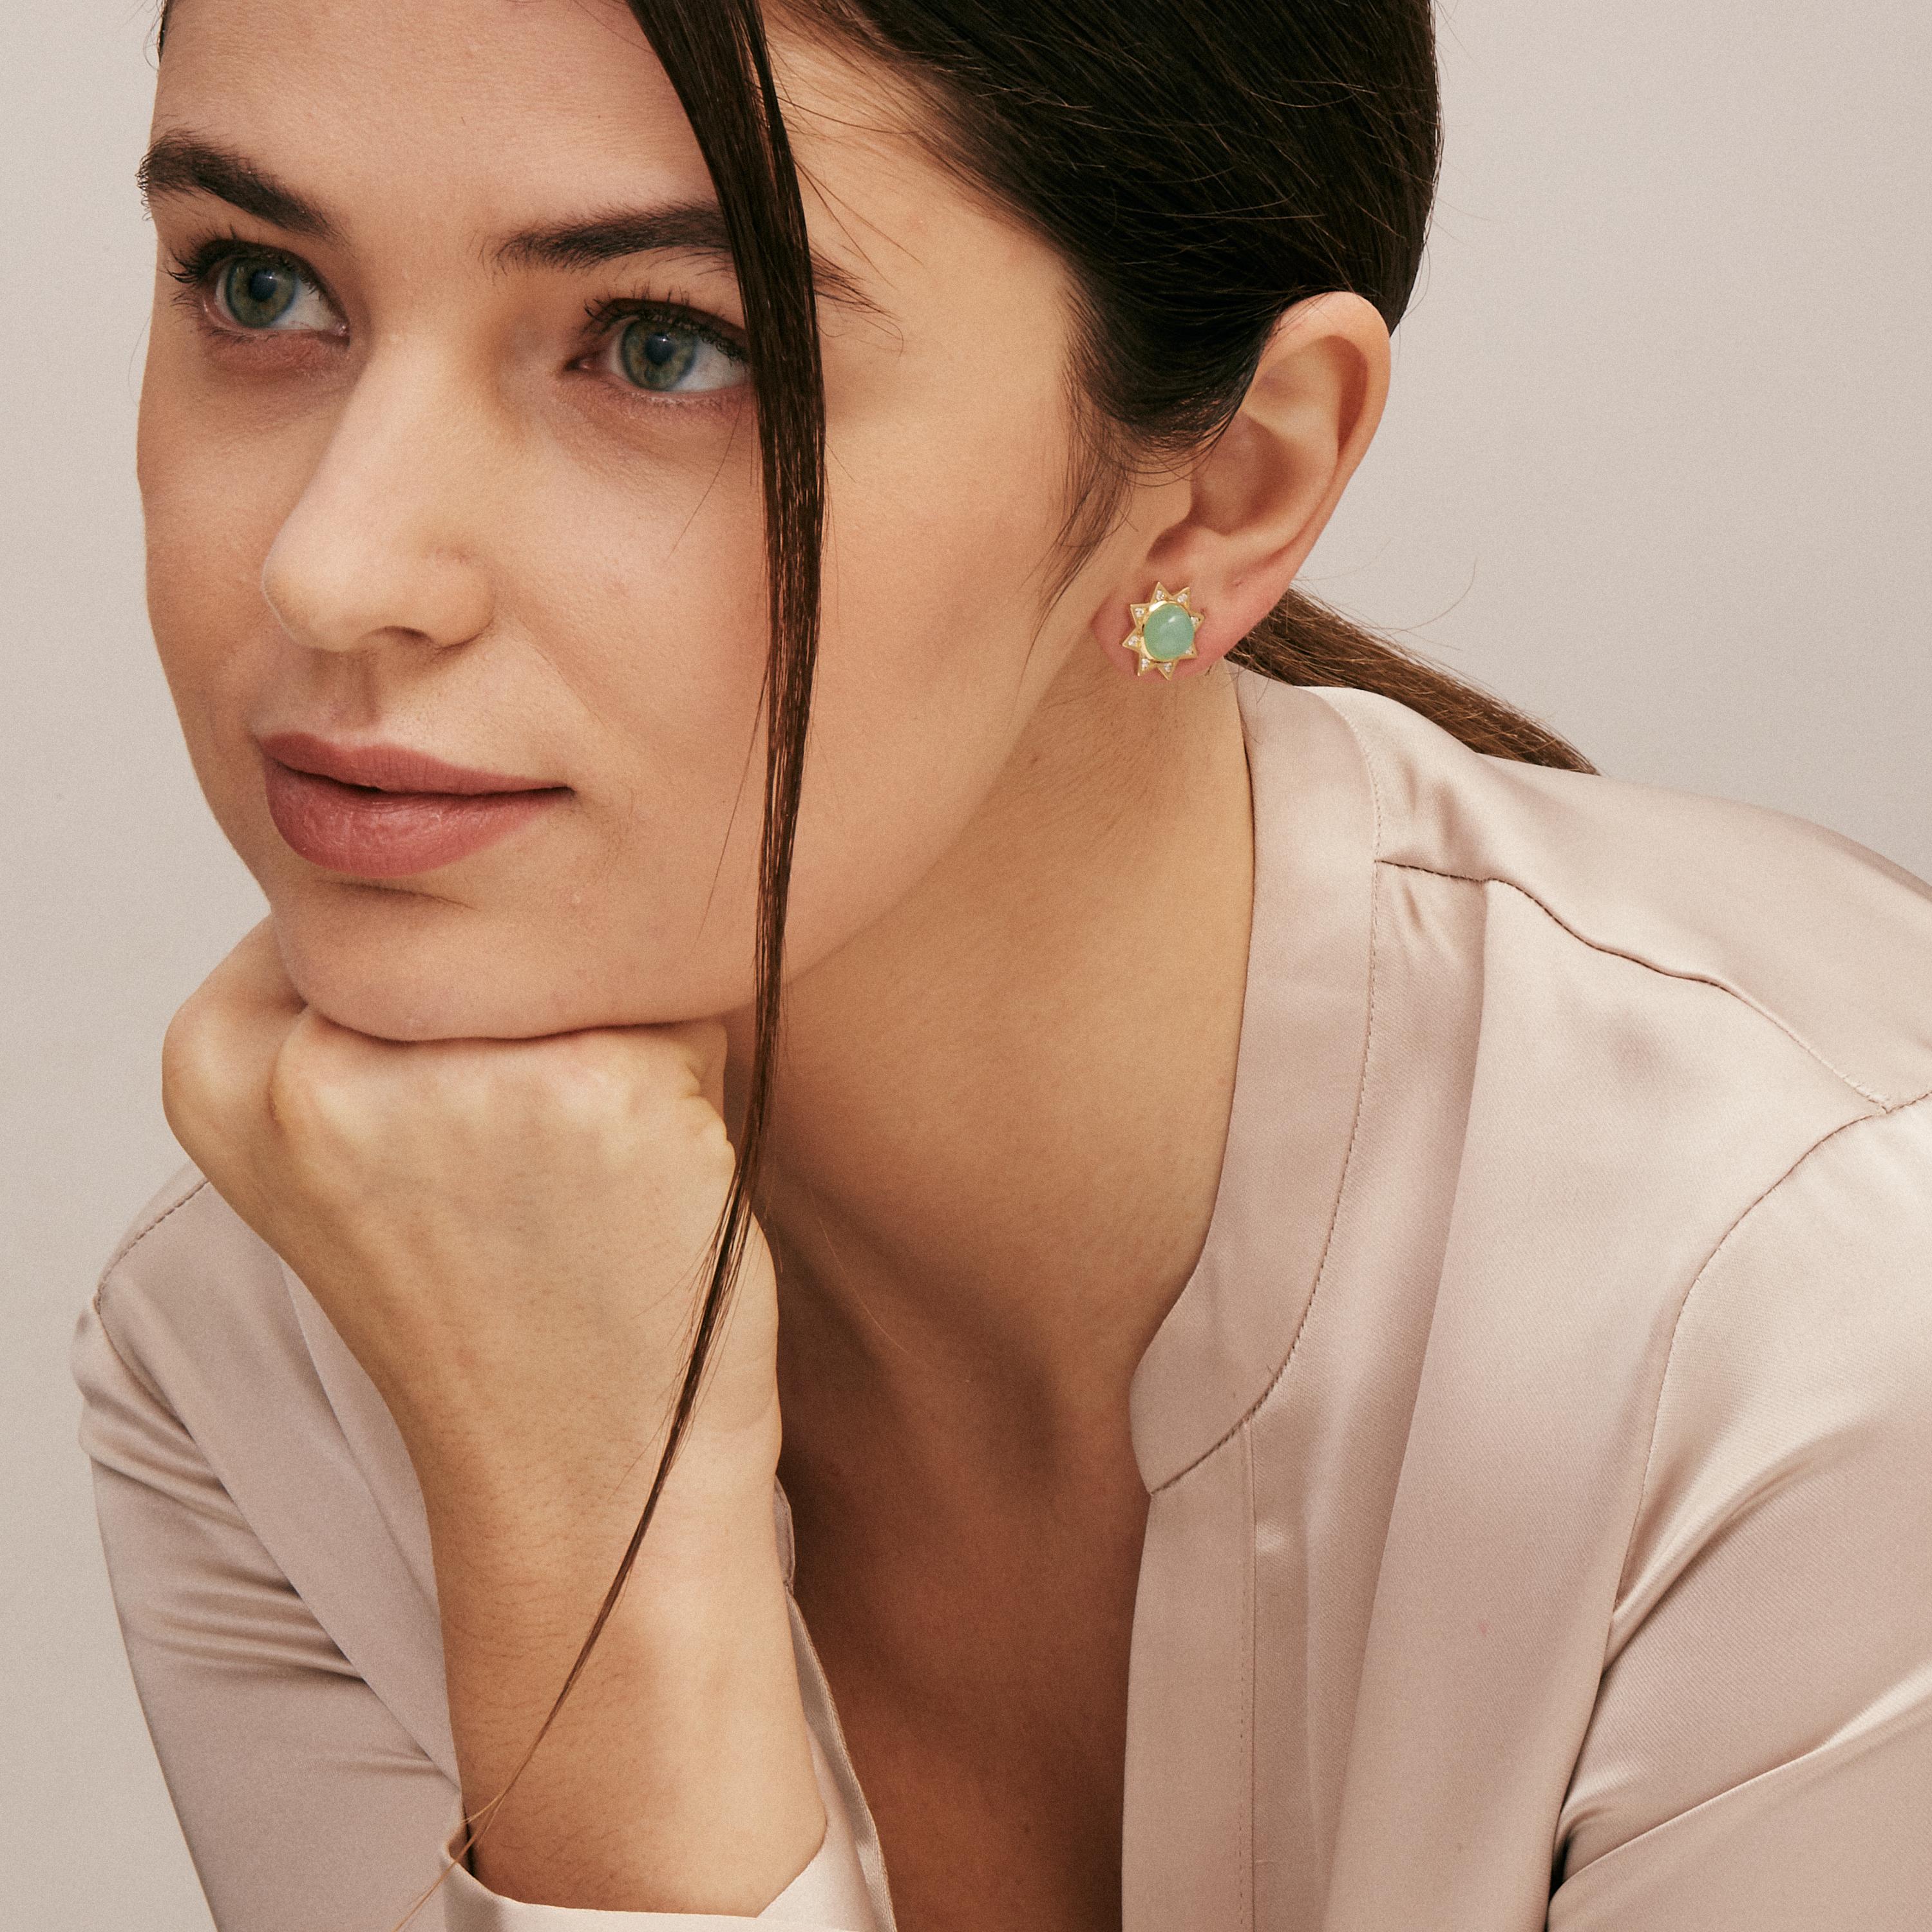 Created in 18 karat yellow gold
Chrysoprase 4.50 carats approx.
Diamonds 0.20 carat approx.
Post backs for pierced ears
Limited Edition

Formed from 18 karat yellow gold, these earrings feature Chrysoprase of around 4.50 carats, alongside